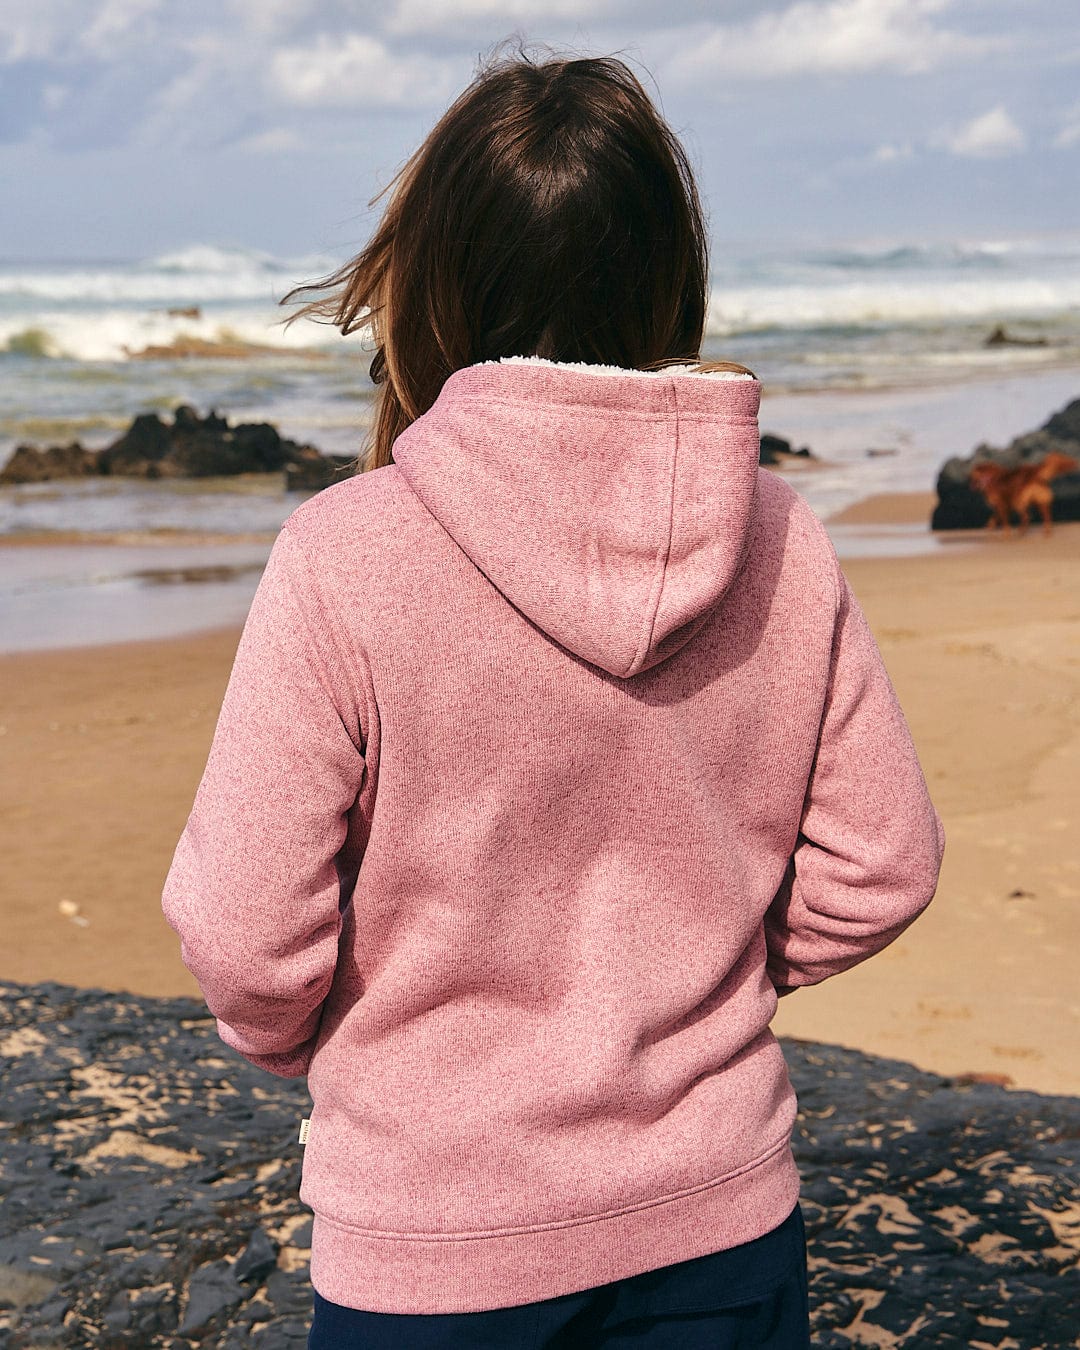 A woman wearing a Galak - Saltrock Womens Fur Lined Hoody - Pink, finding comfort while looking at the ocean.